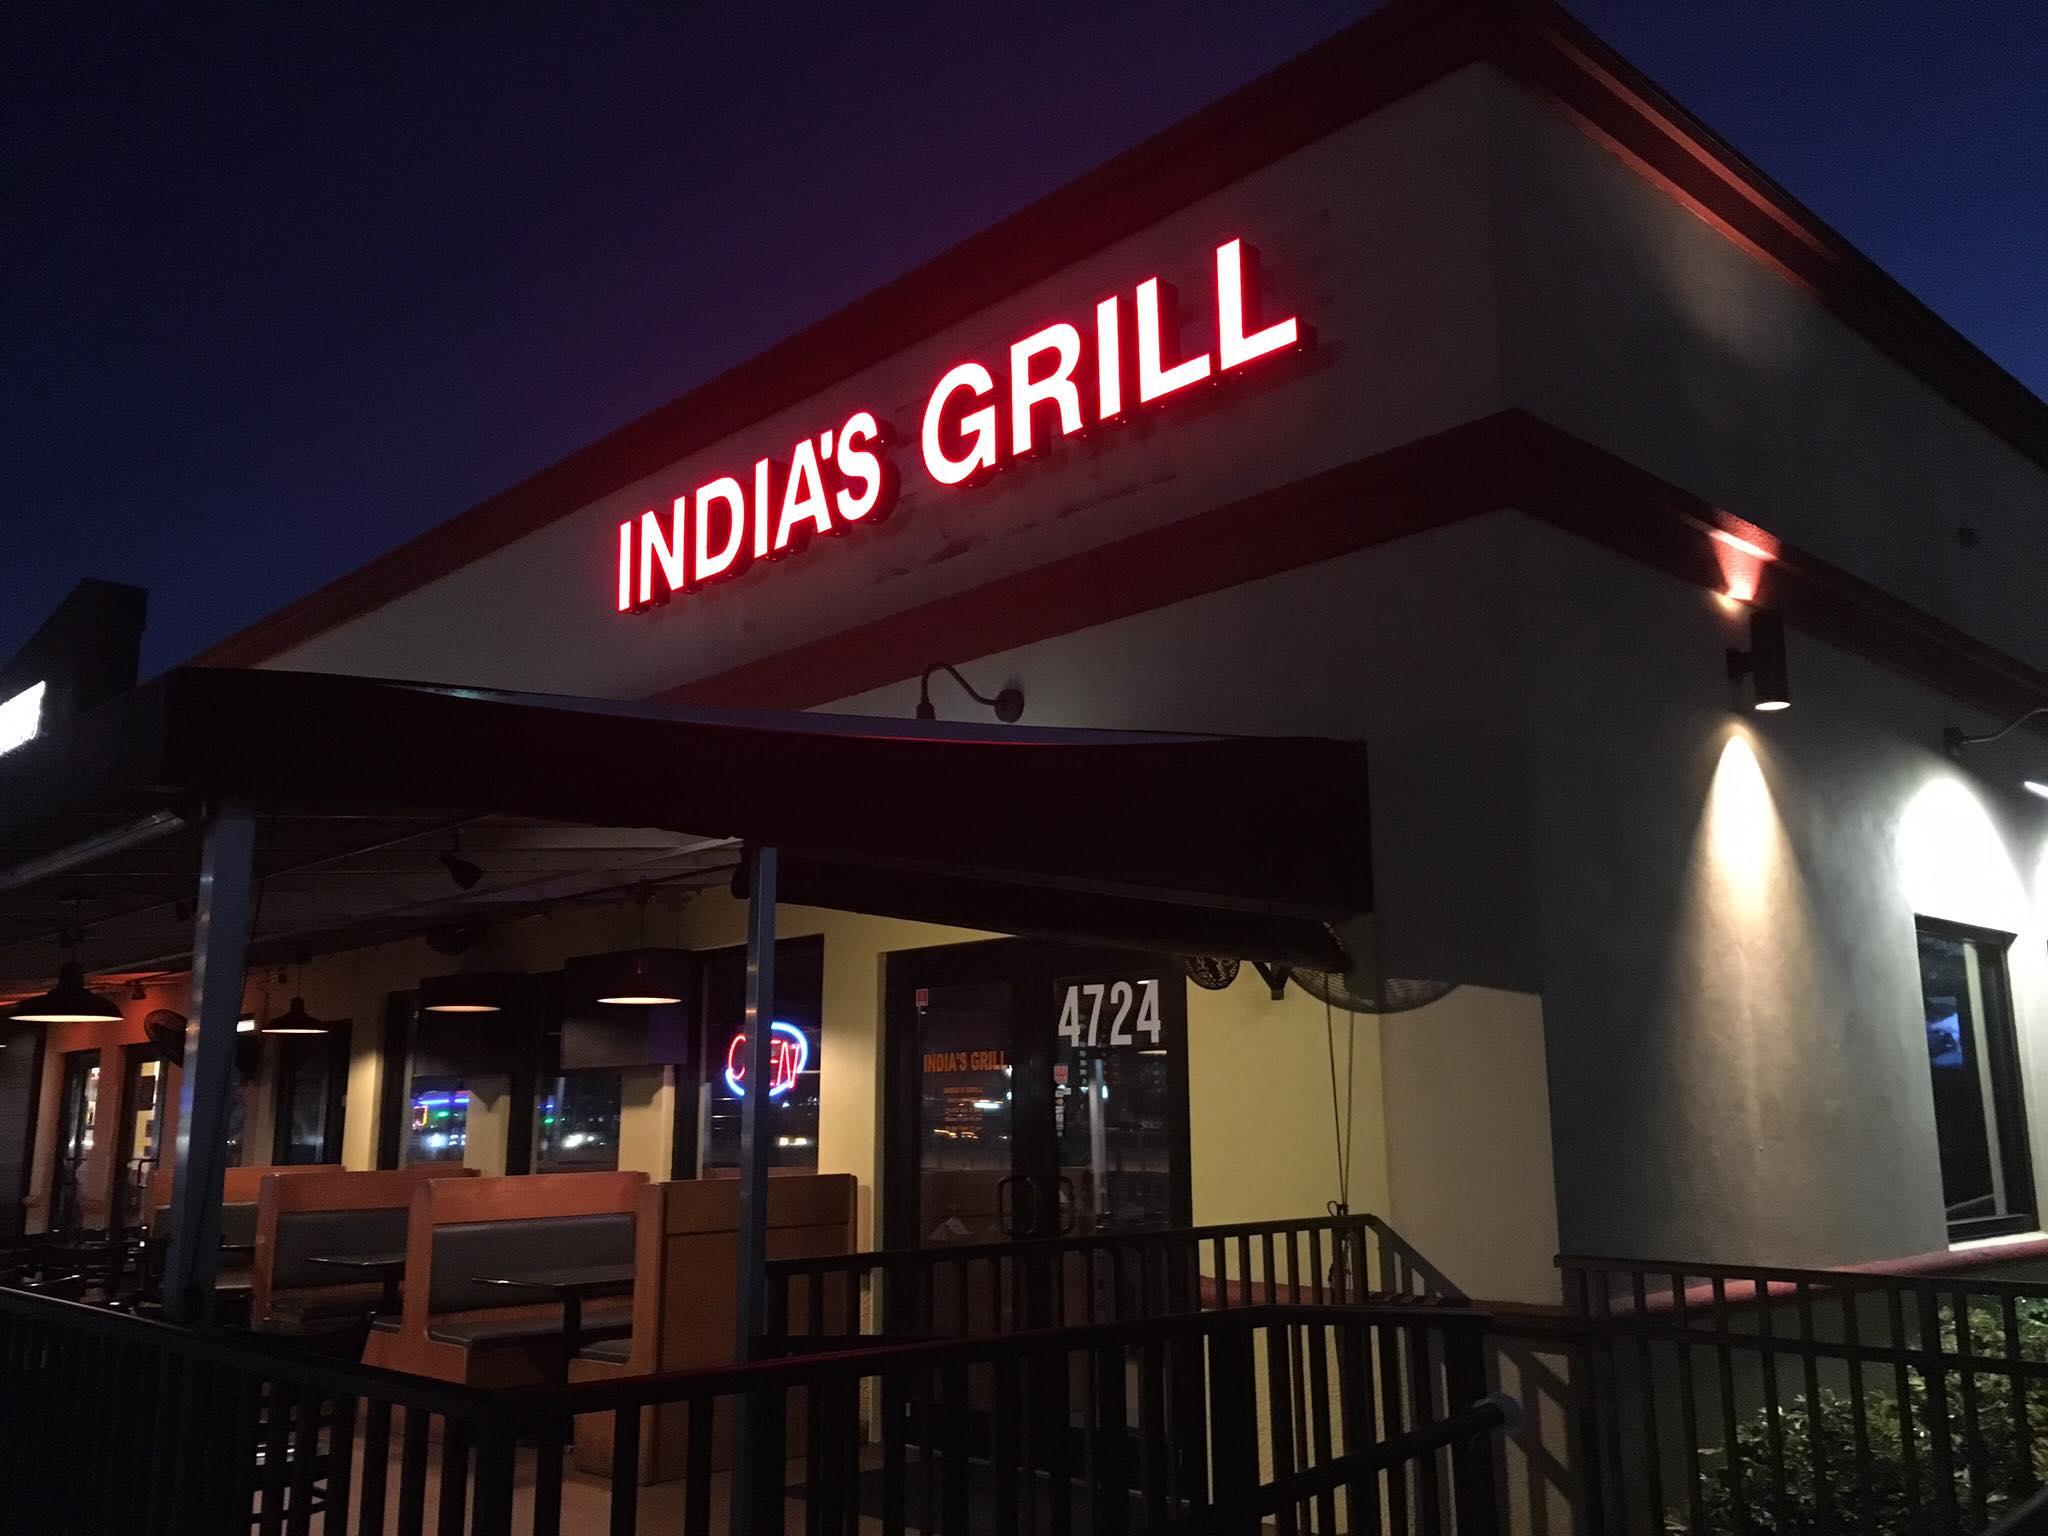 Pet Friendly India's Grill